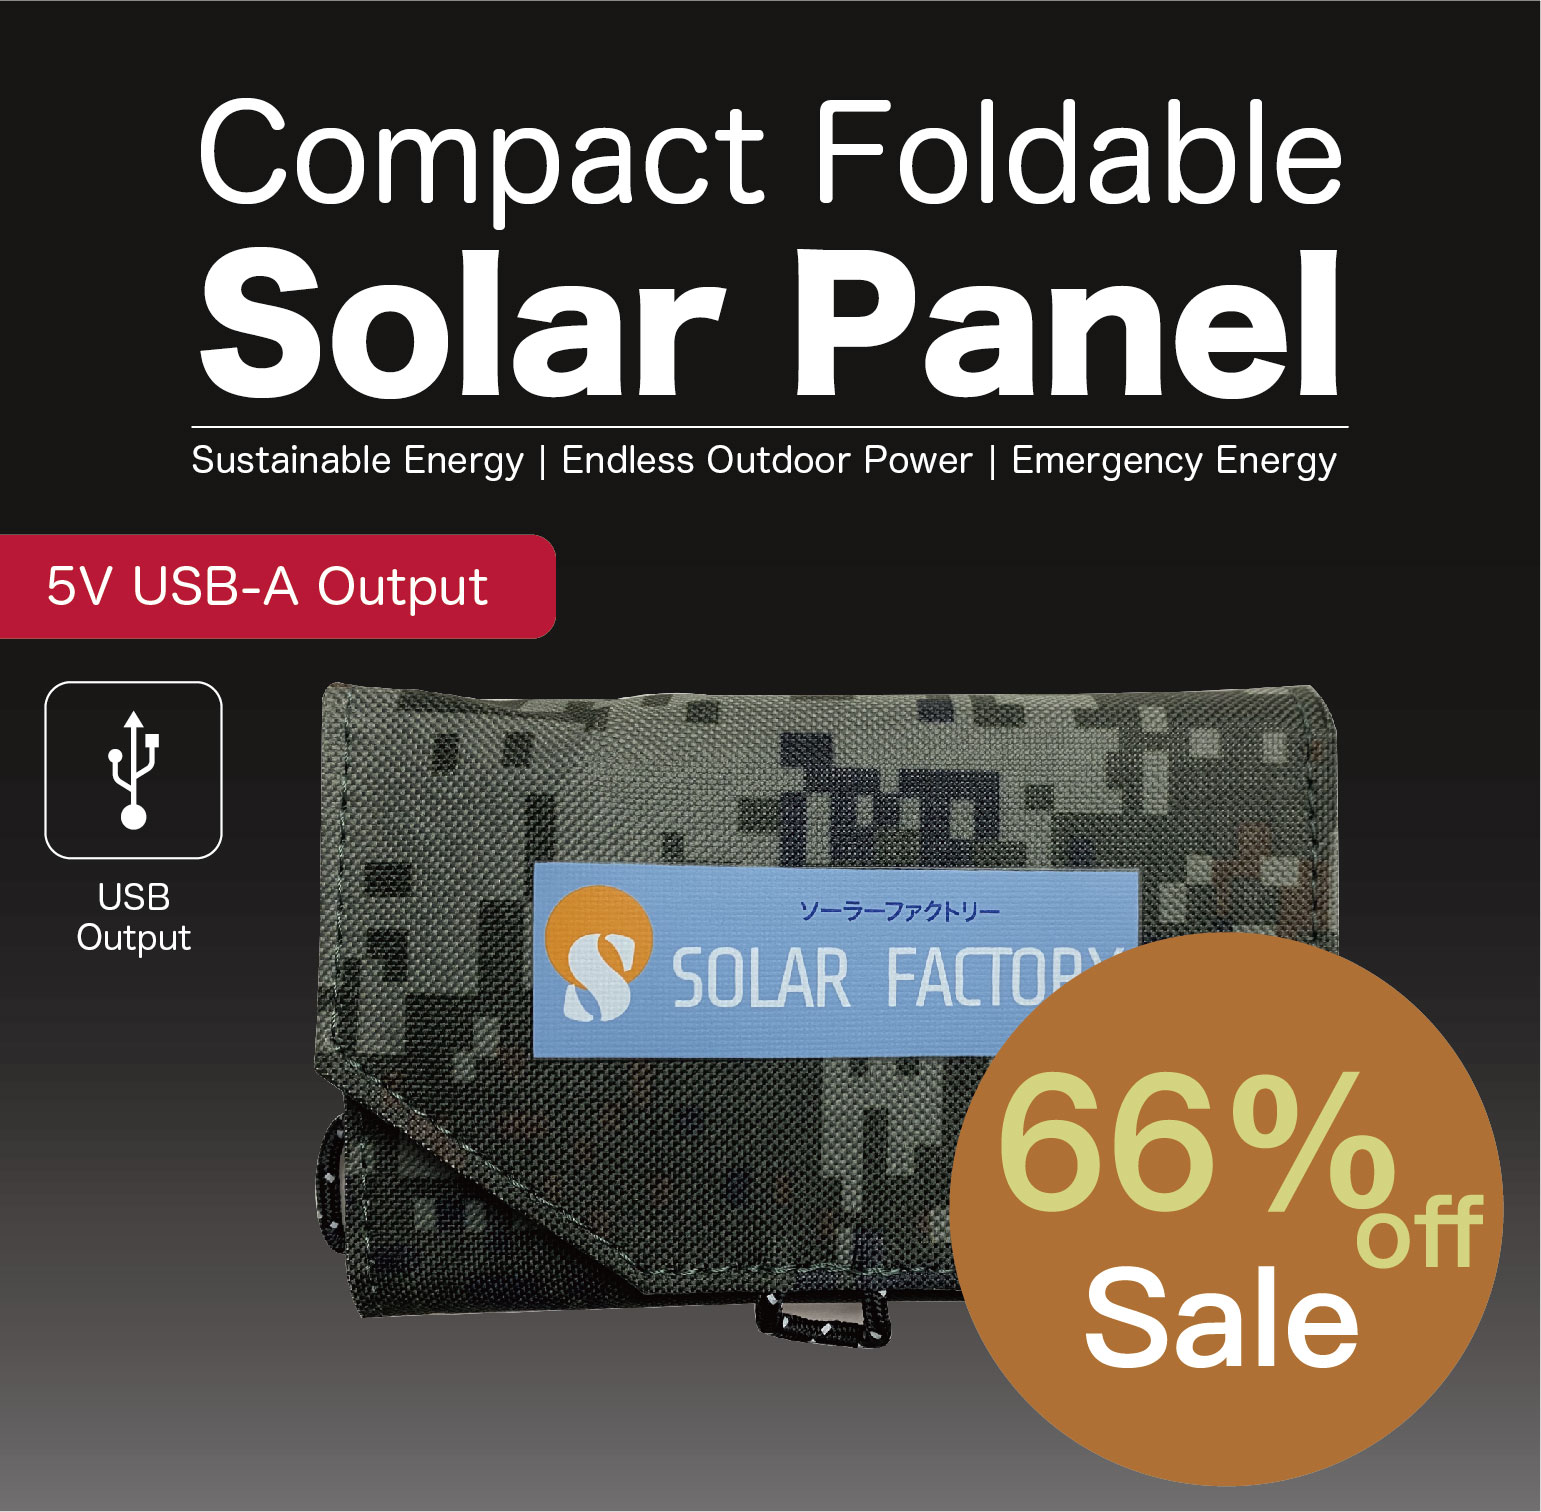 SP5W Compact Foldable Solar Panel - Powerbegin - We, powerbegin are a registered company selling certified varieties of accessories and gadgets that run based on solar energy.